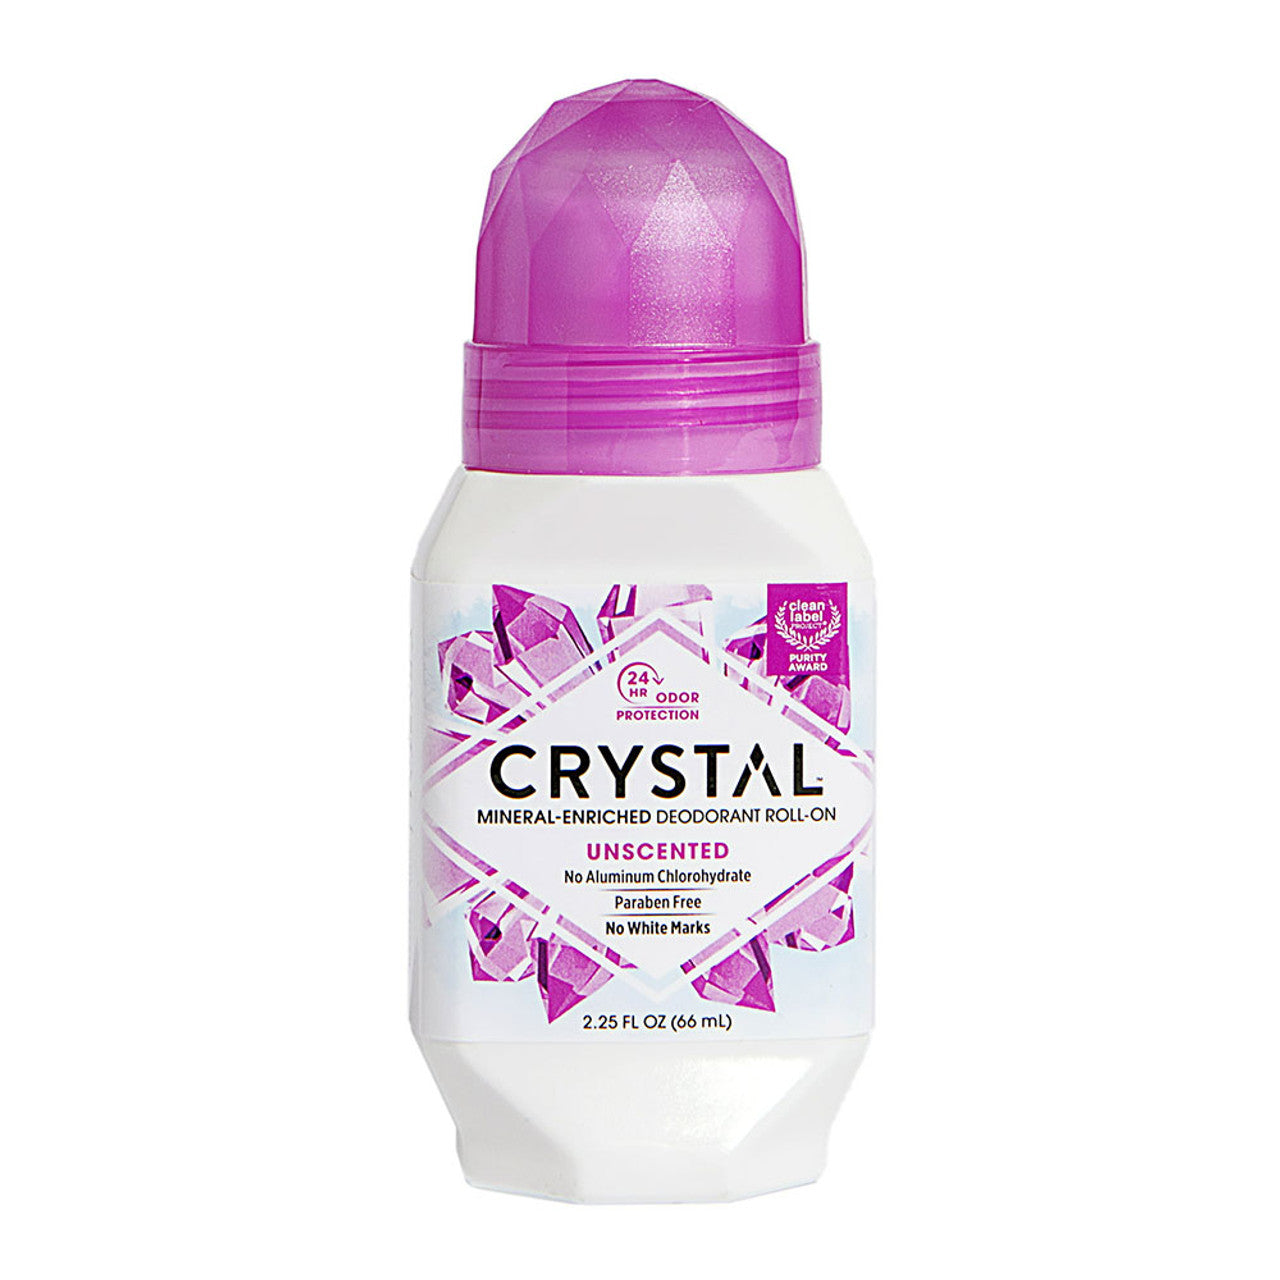 Crystal Mineral Body Deodorant Roll-On, Unscented, 2.25 oz